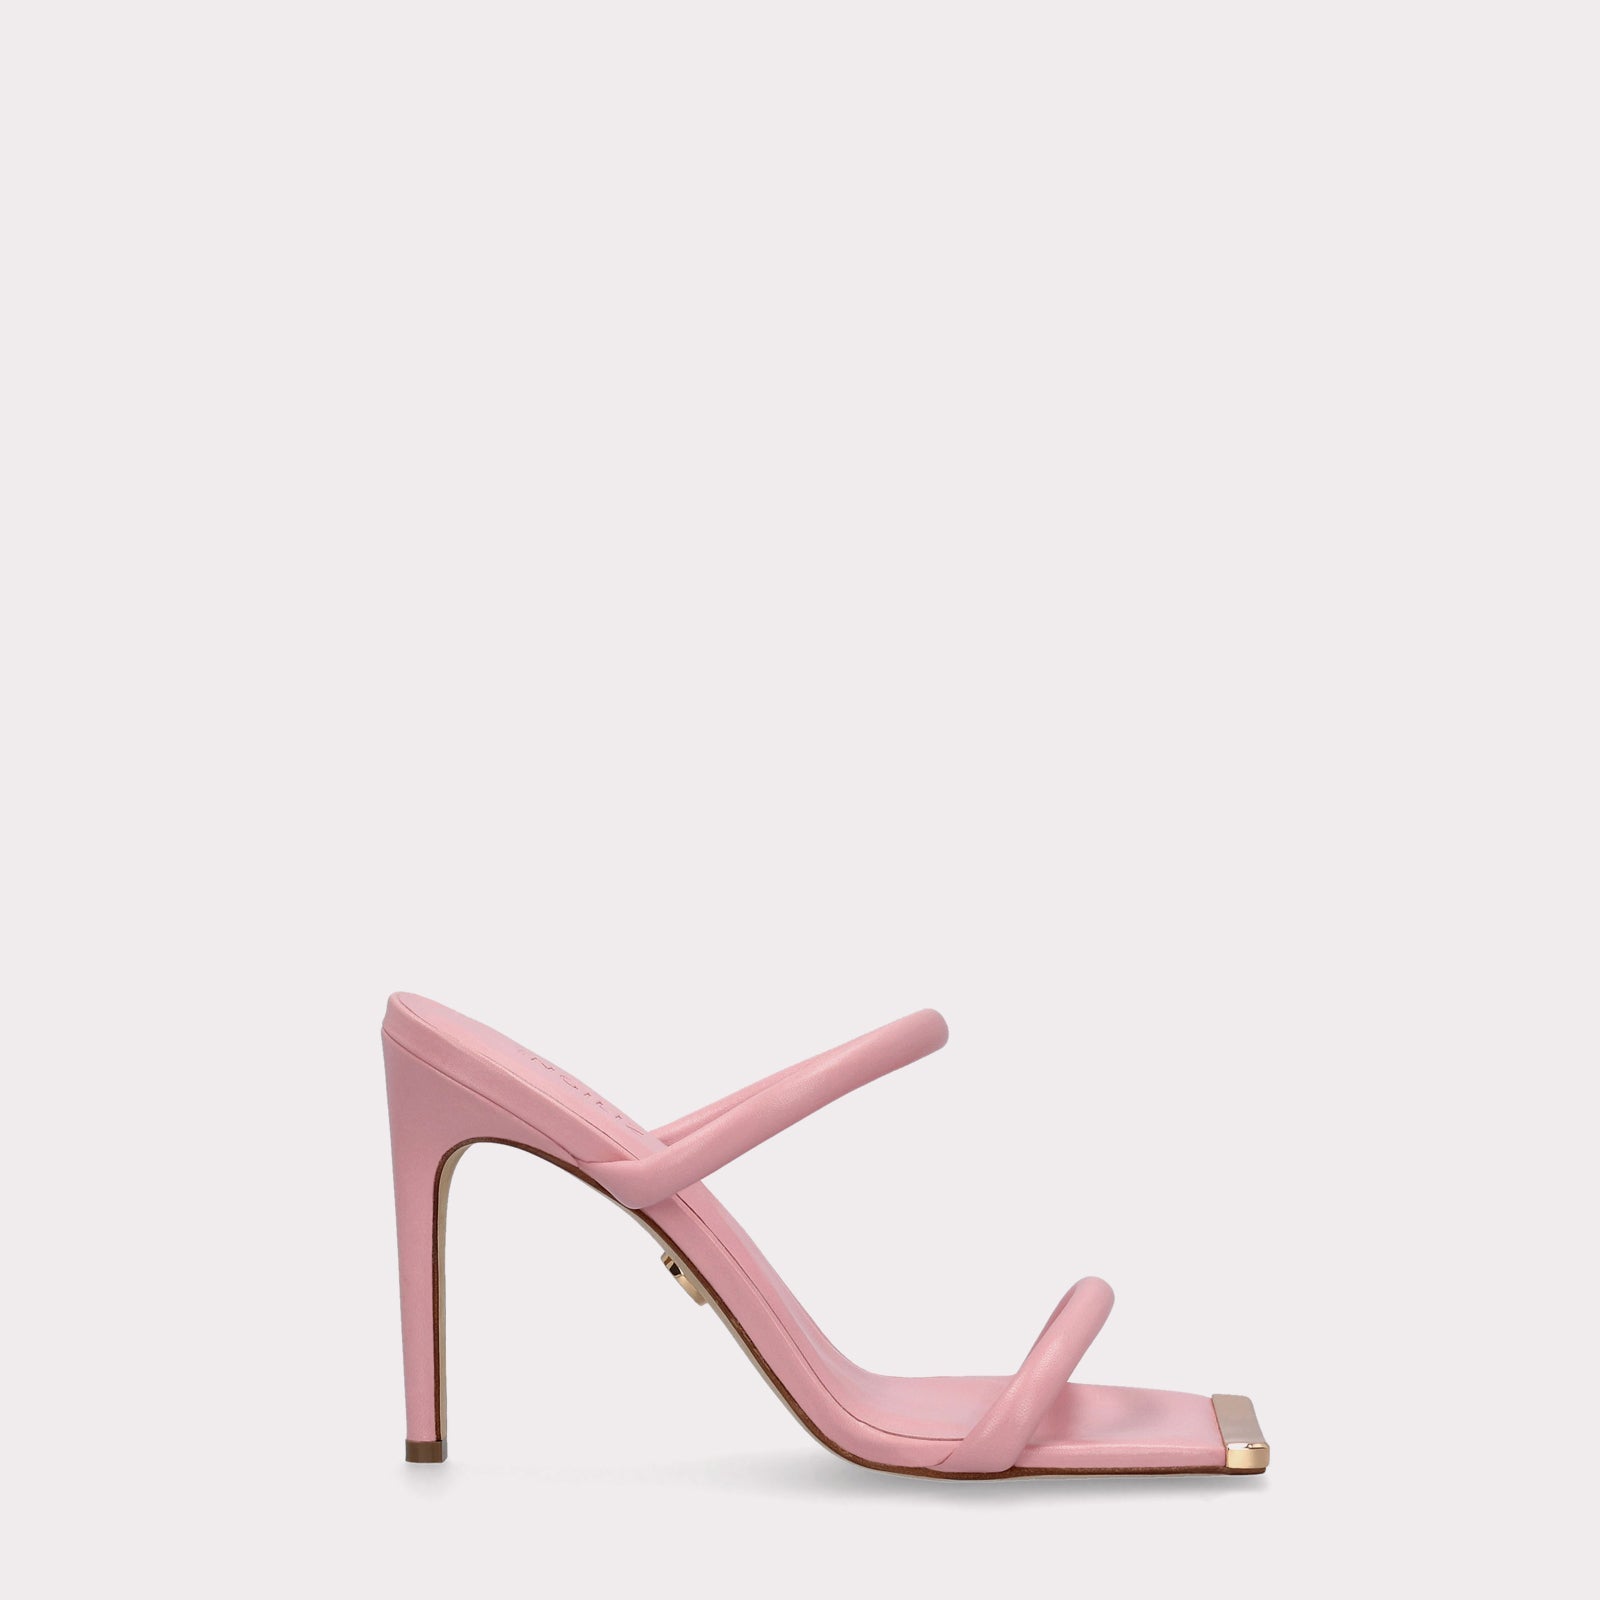 KATERINA PINK SMOOTH LEATHER MULES